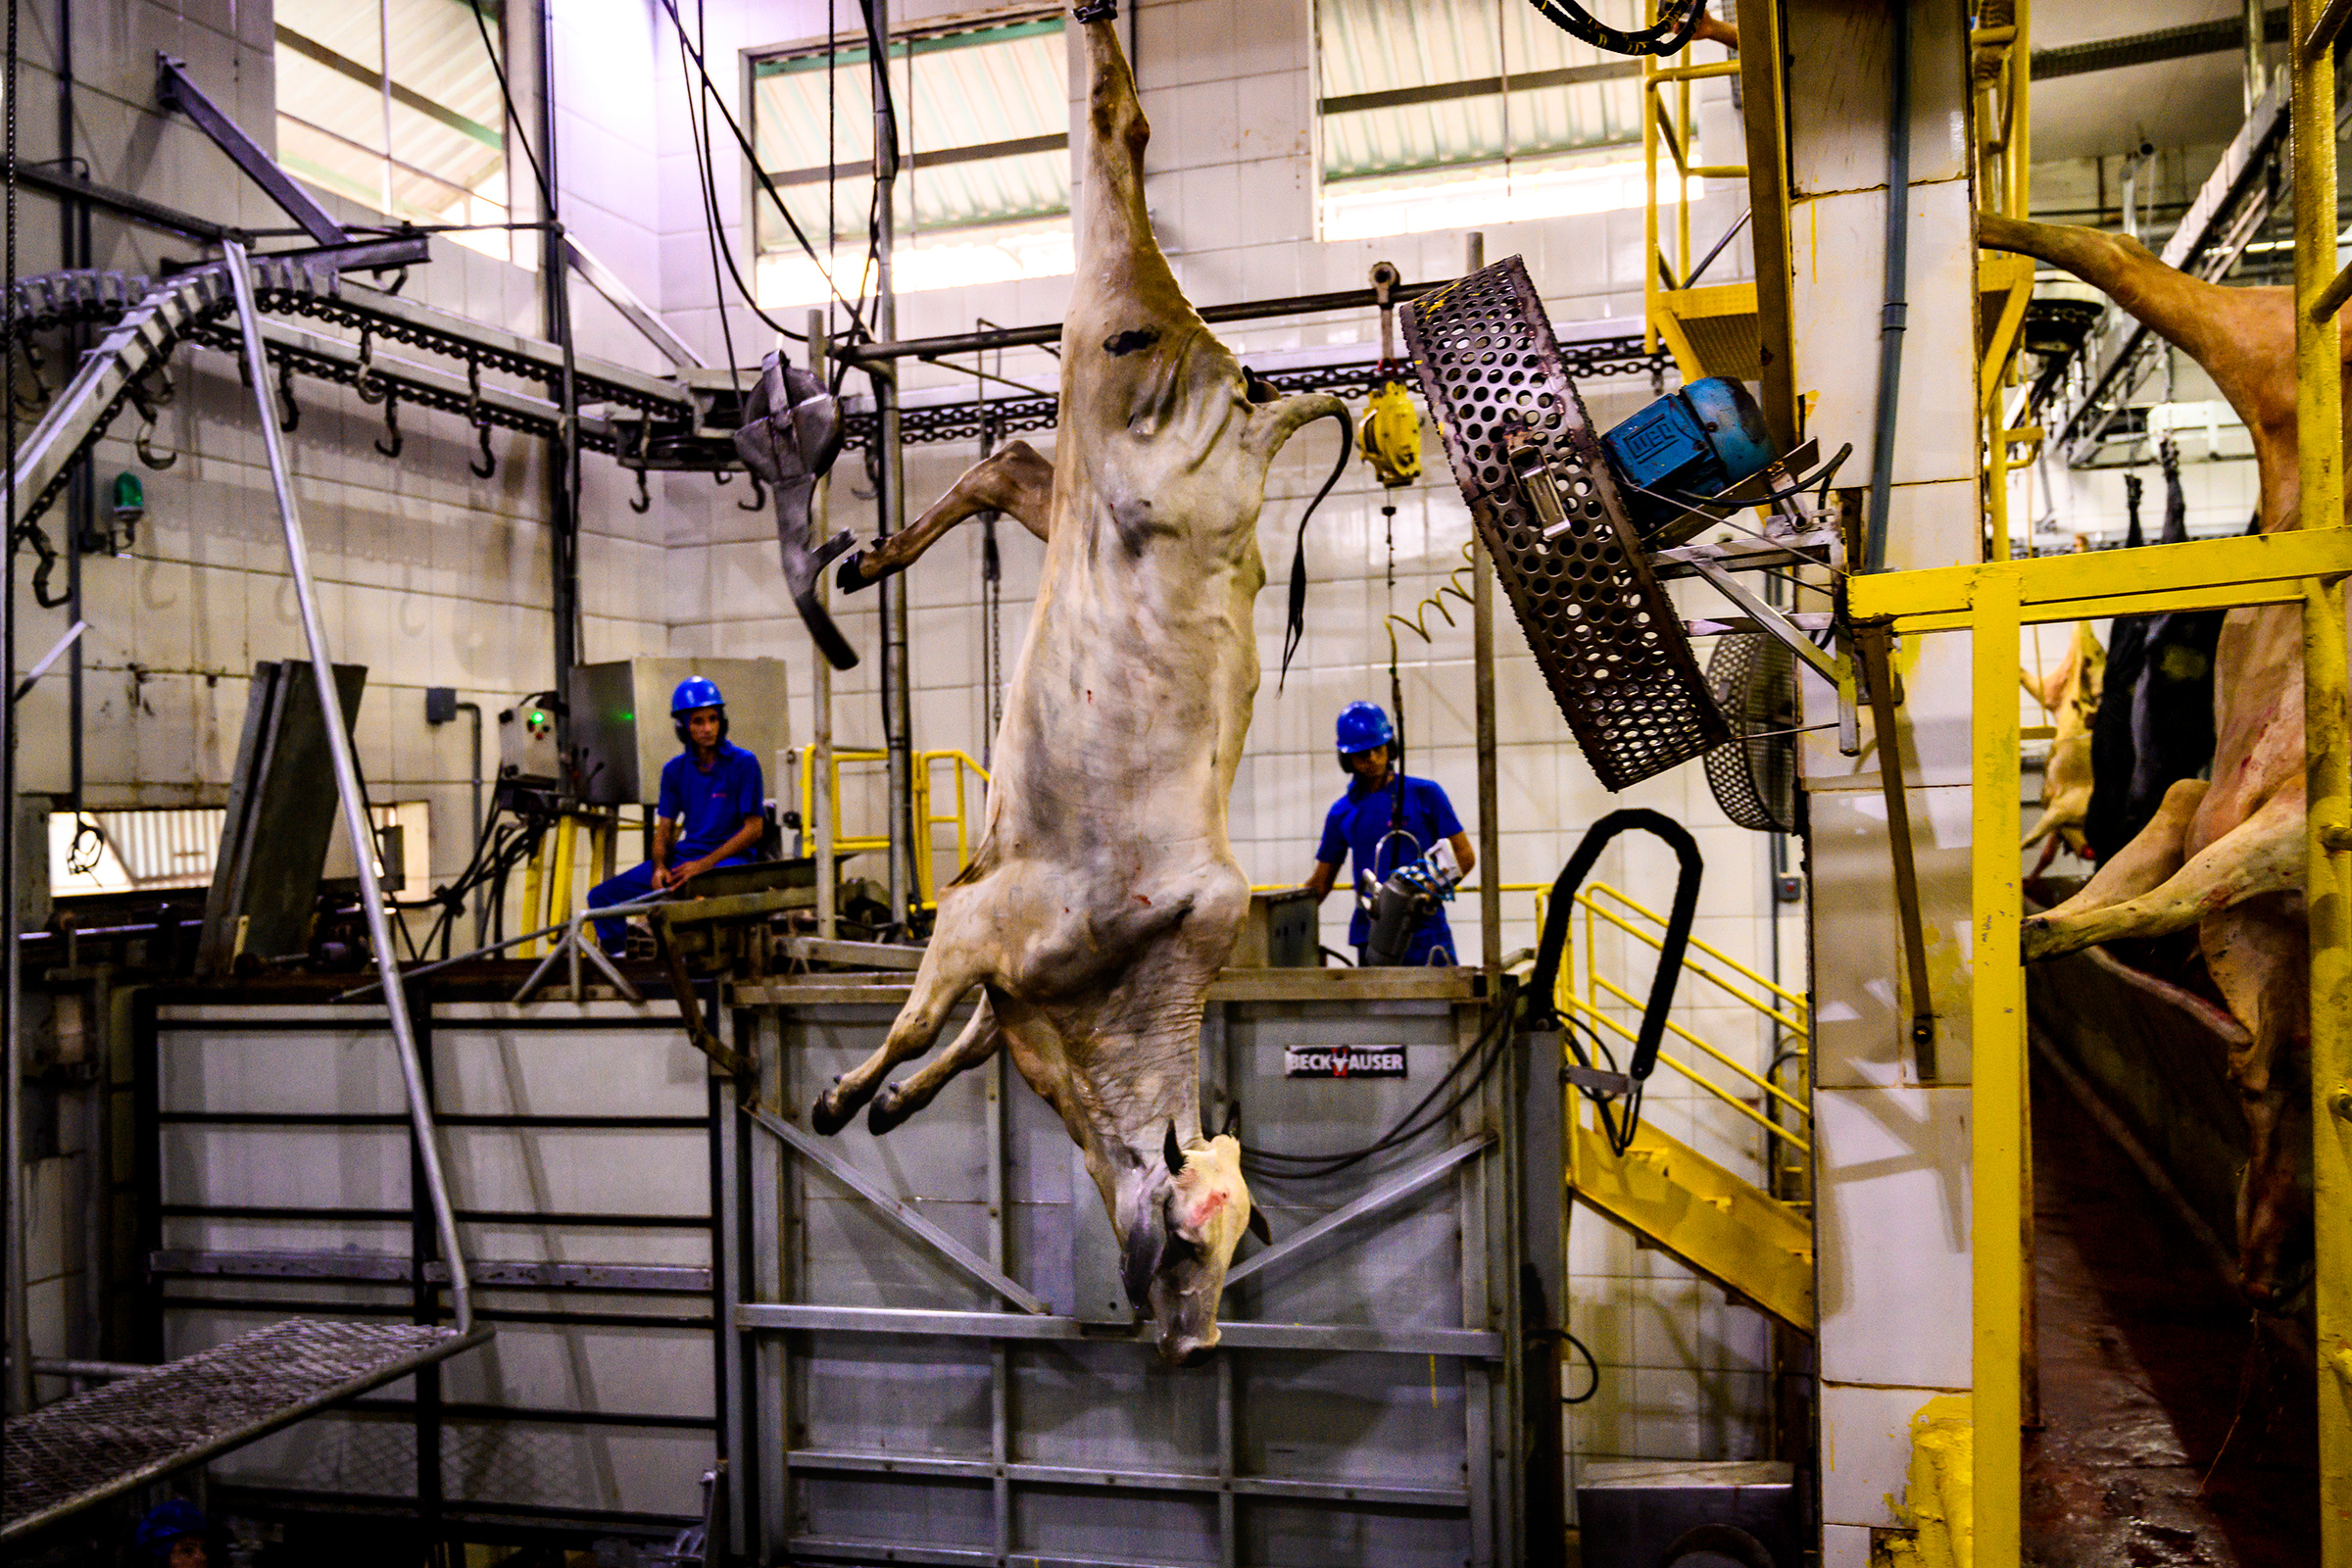 A slaughterhouse in the Brazilian state of Rondônia in February 2019. The company boasted an expansion would allow a cow to be killed every eight seconds at the facility.